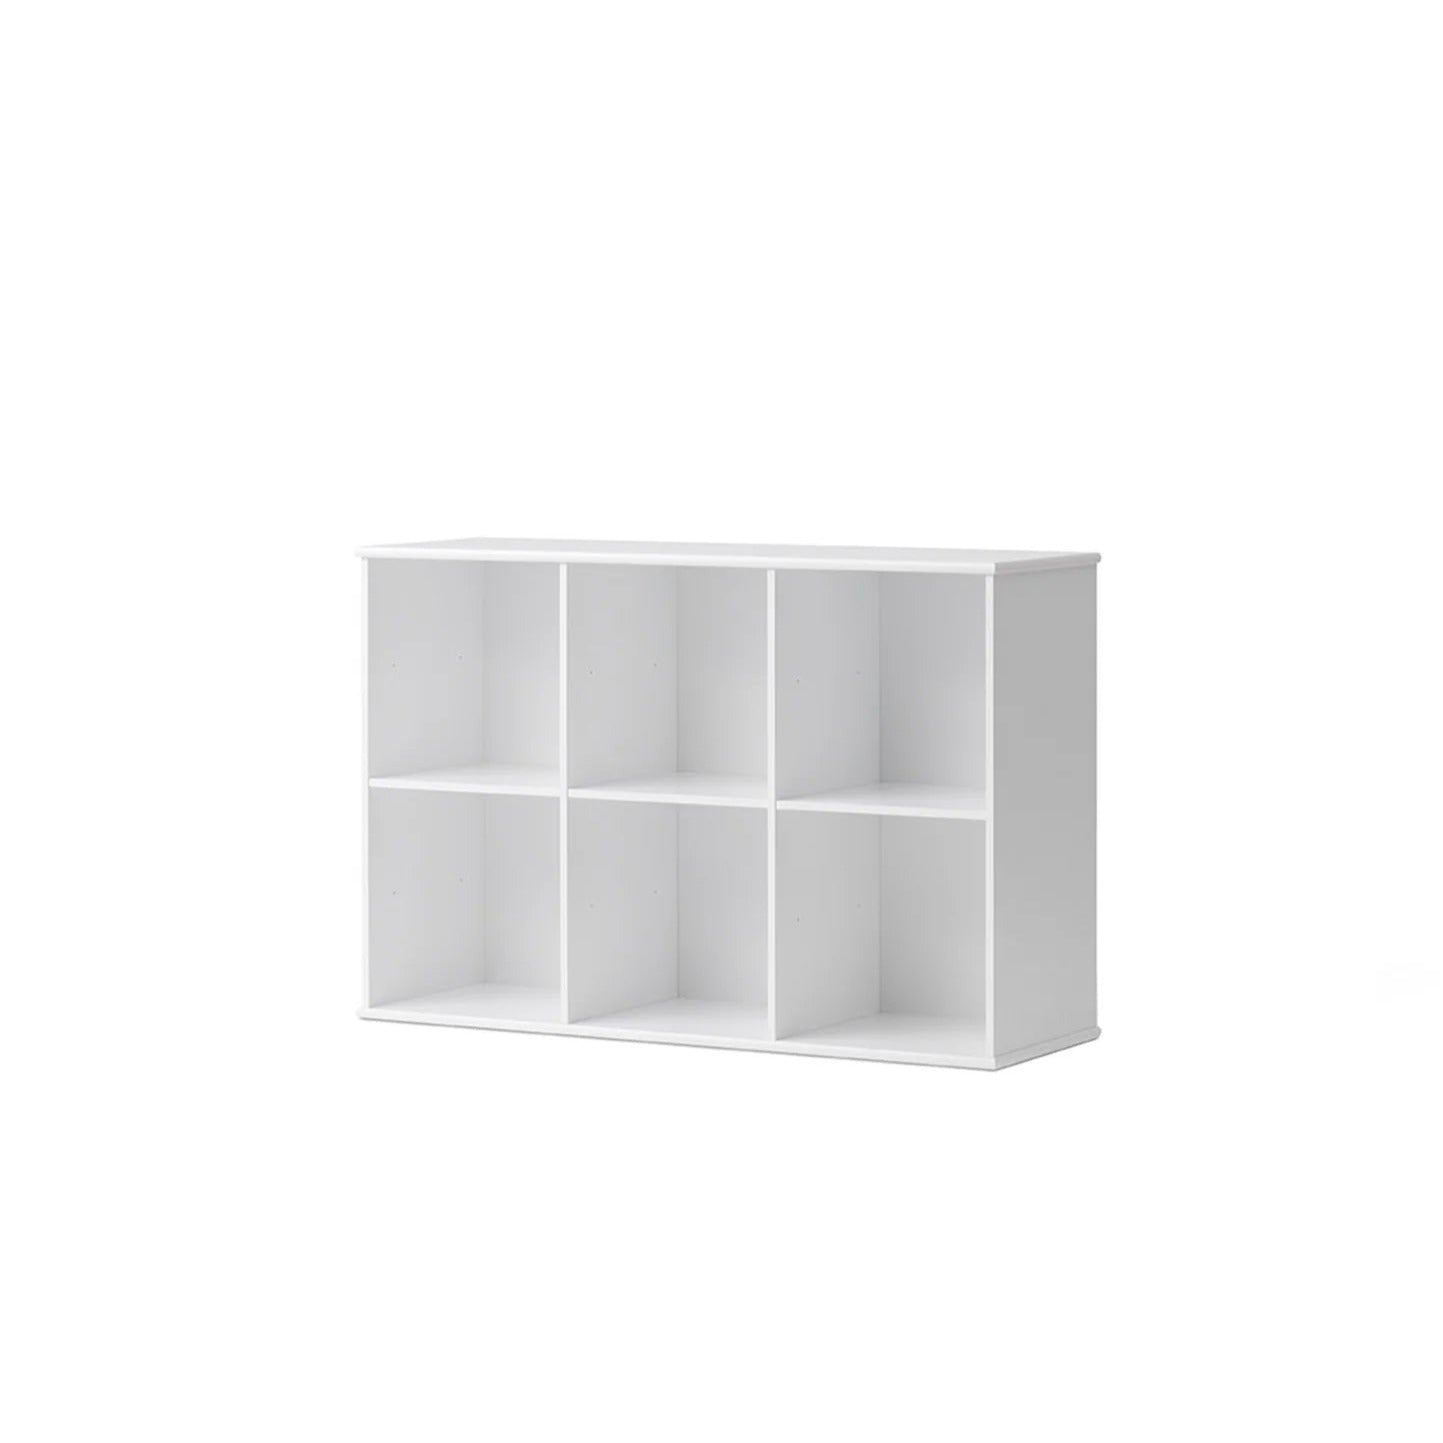 Oliver Furniture Wood Shelving Unit - 3 x 2 With Support